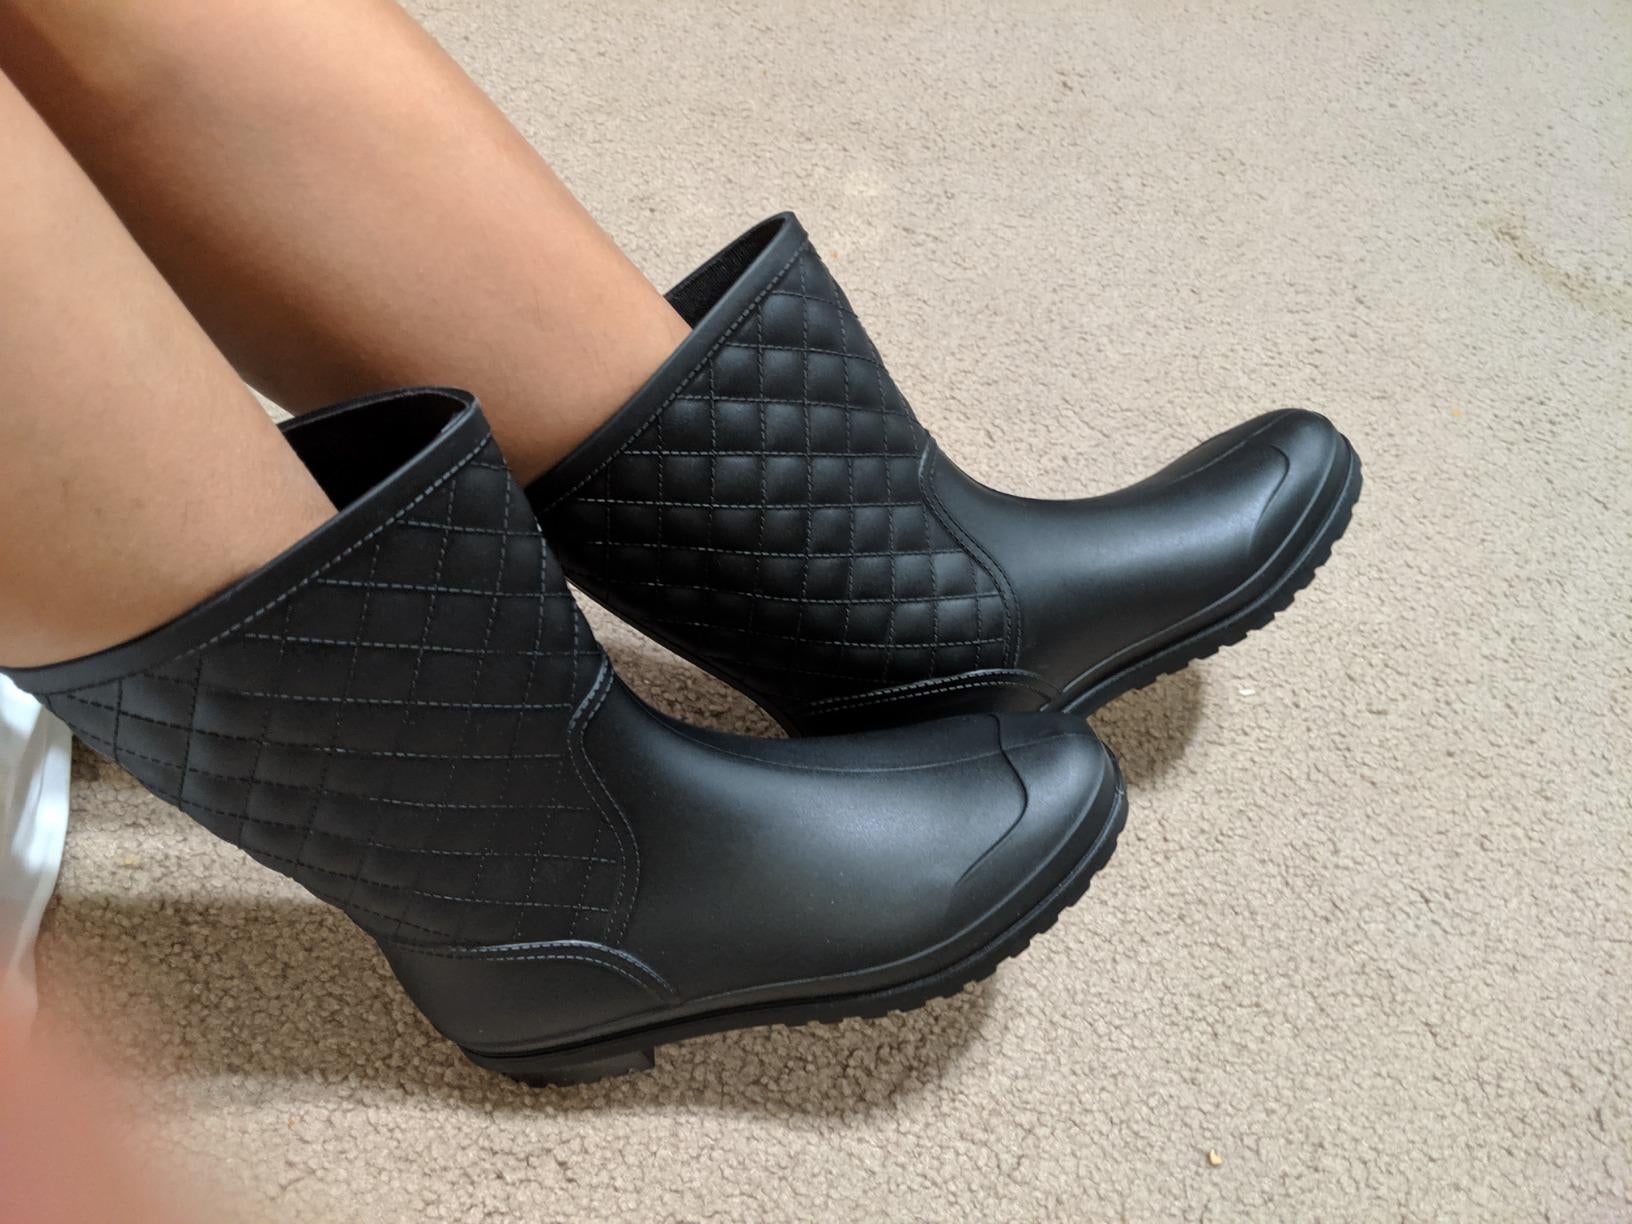 close up of the black rain boots on a reviewer's feet